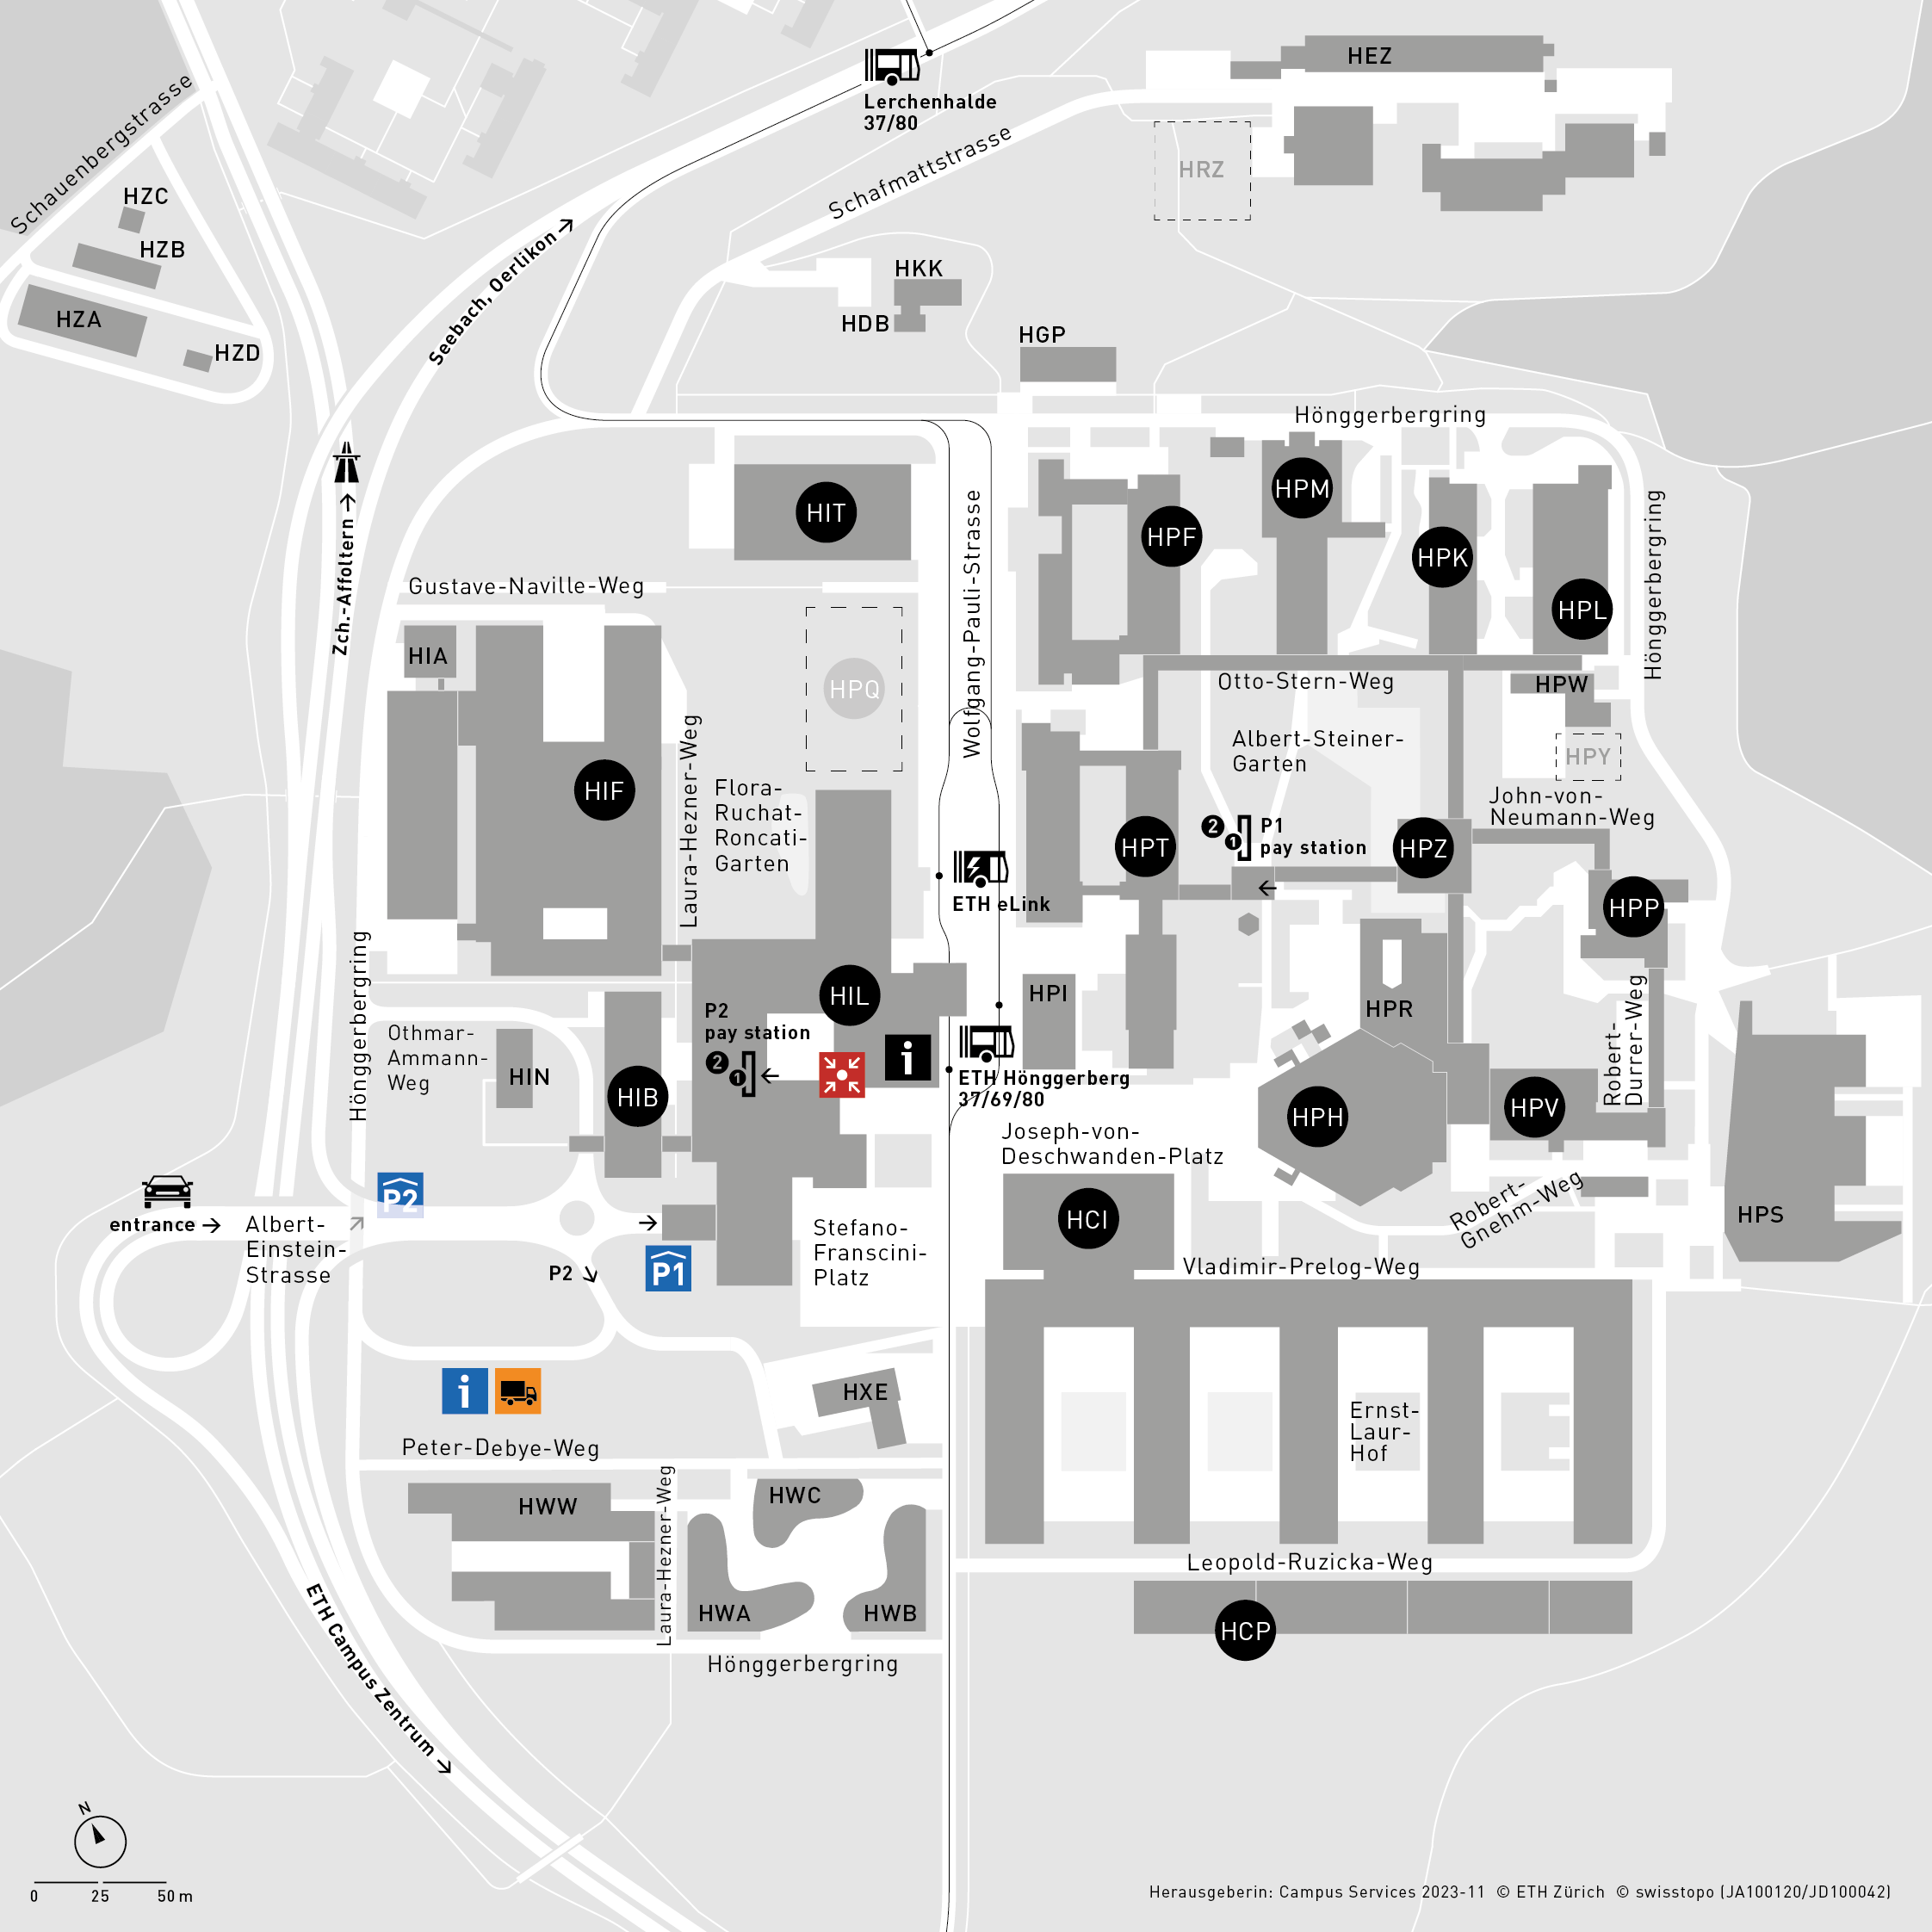 location of the parking locations P1 and P2 on a campus map and directions to HCI Building from bus stop "ETH Hönggerberg" (Exit of parking location P1)